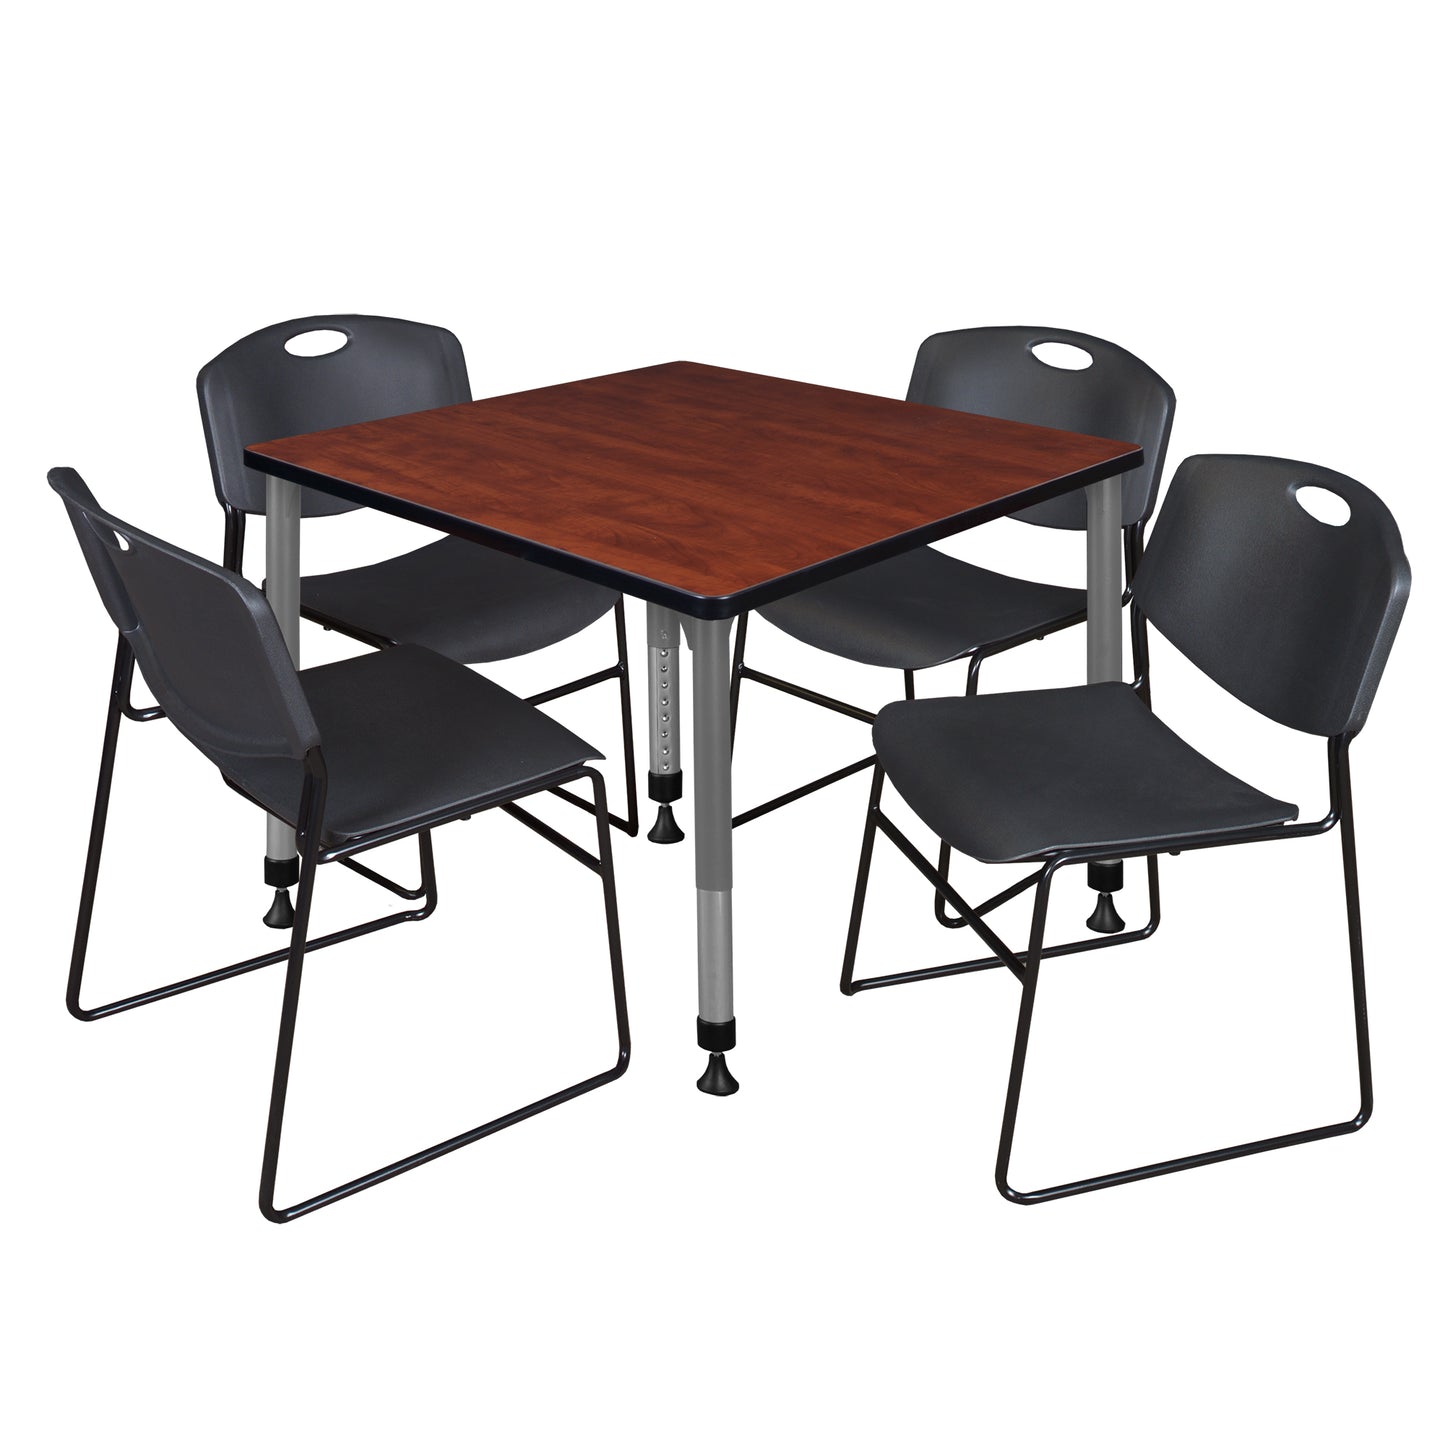 Regency Kee 42 in. Square Adjustable Classroom Table & 4 Zeng Stack Chairs